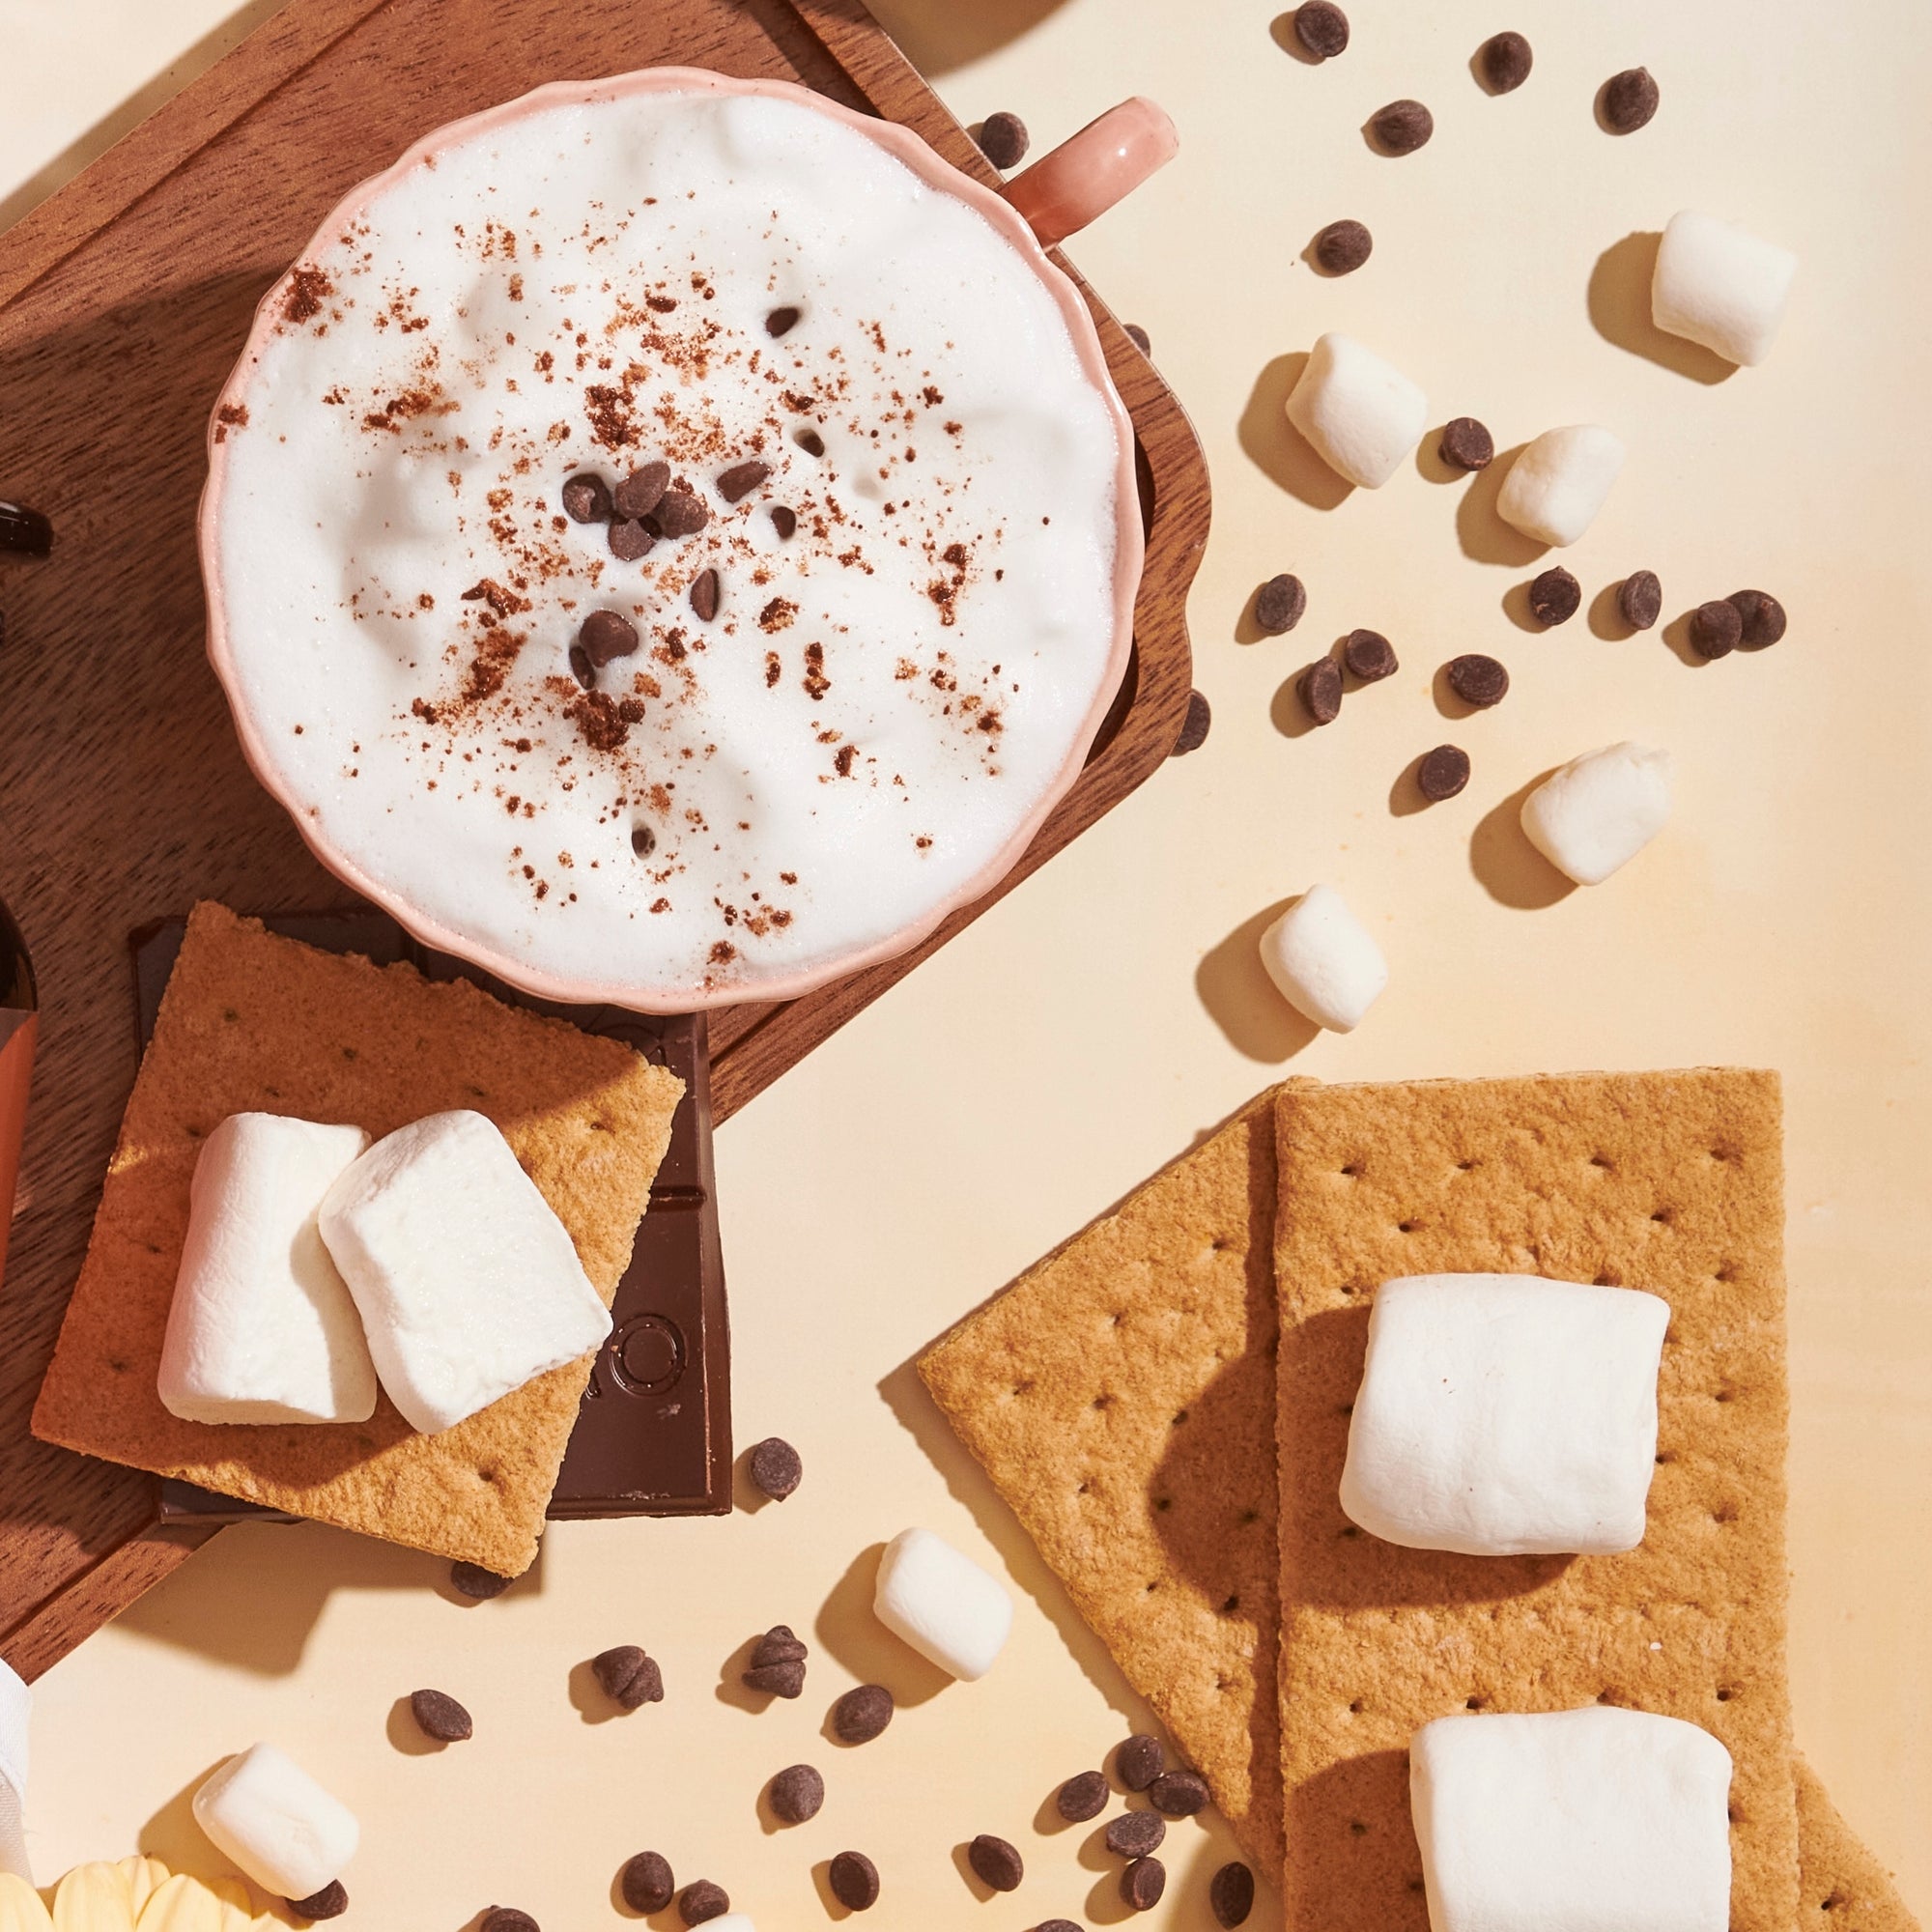 a S'mores tea latte with foamed milk, chocolate and cinnamon and chocolate chips sprinkled on the table with graham crackers, chocolate, and marshmallows,